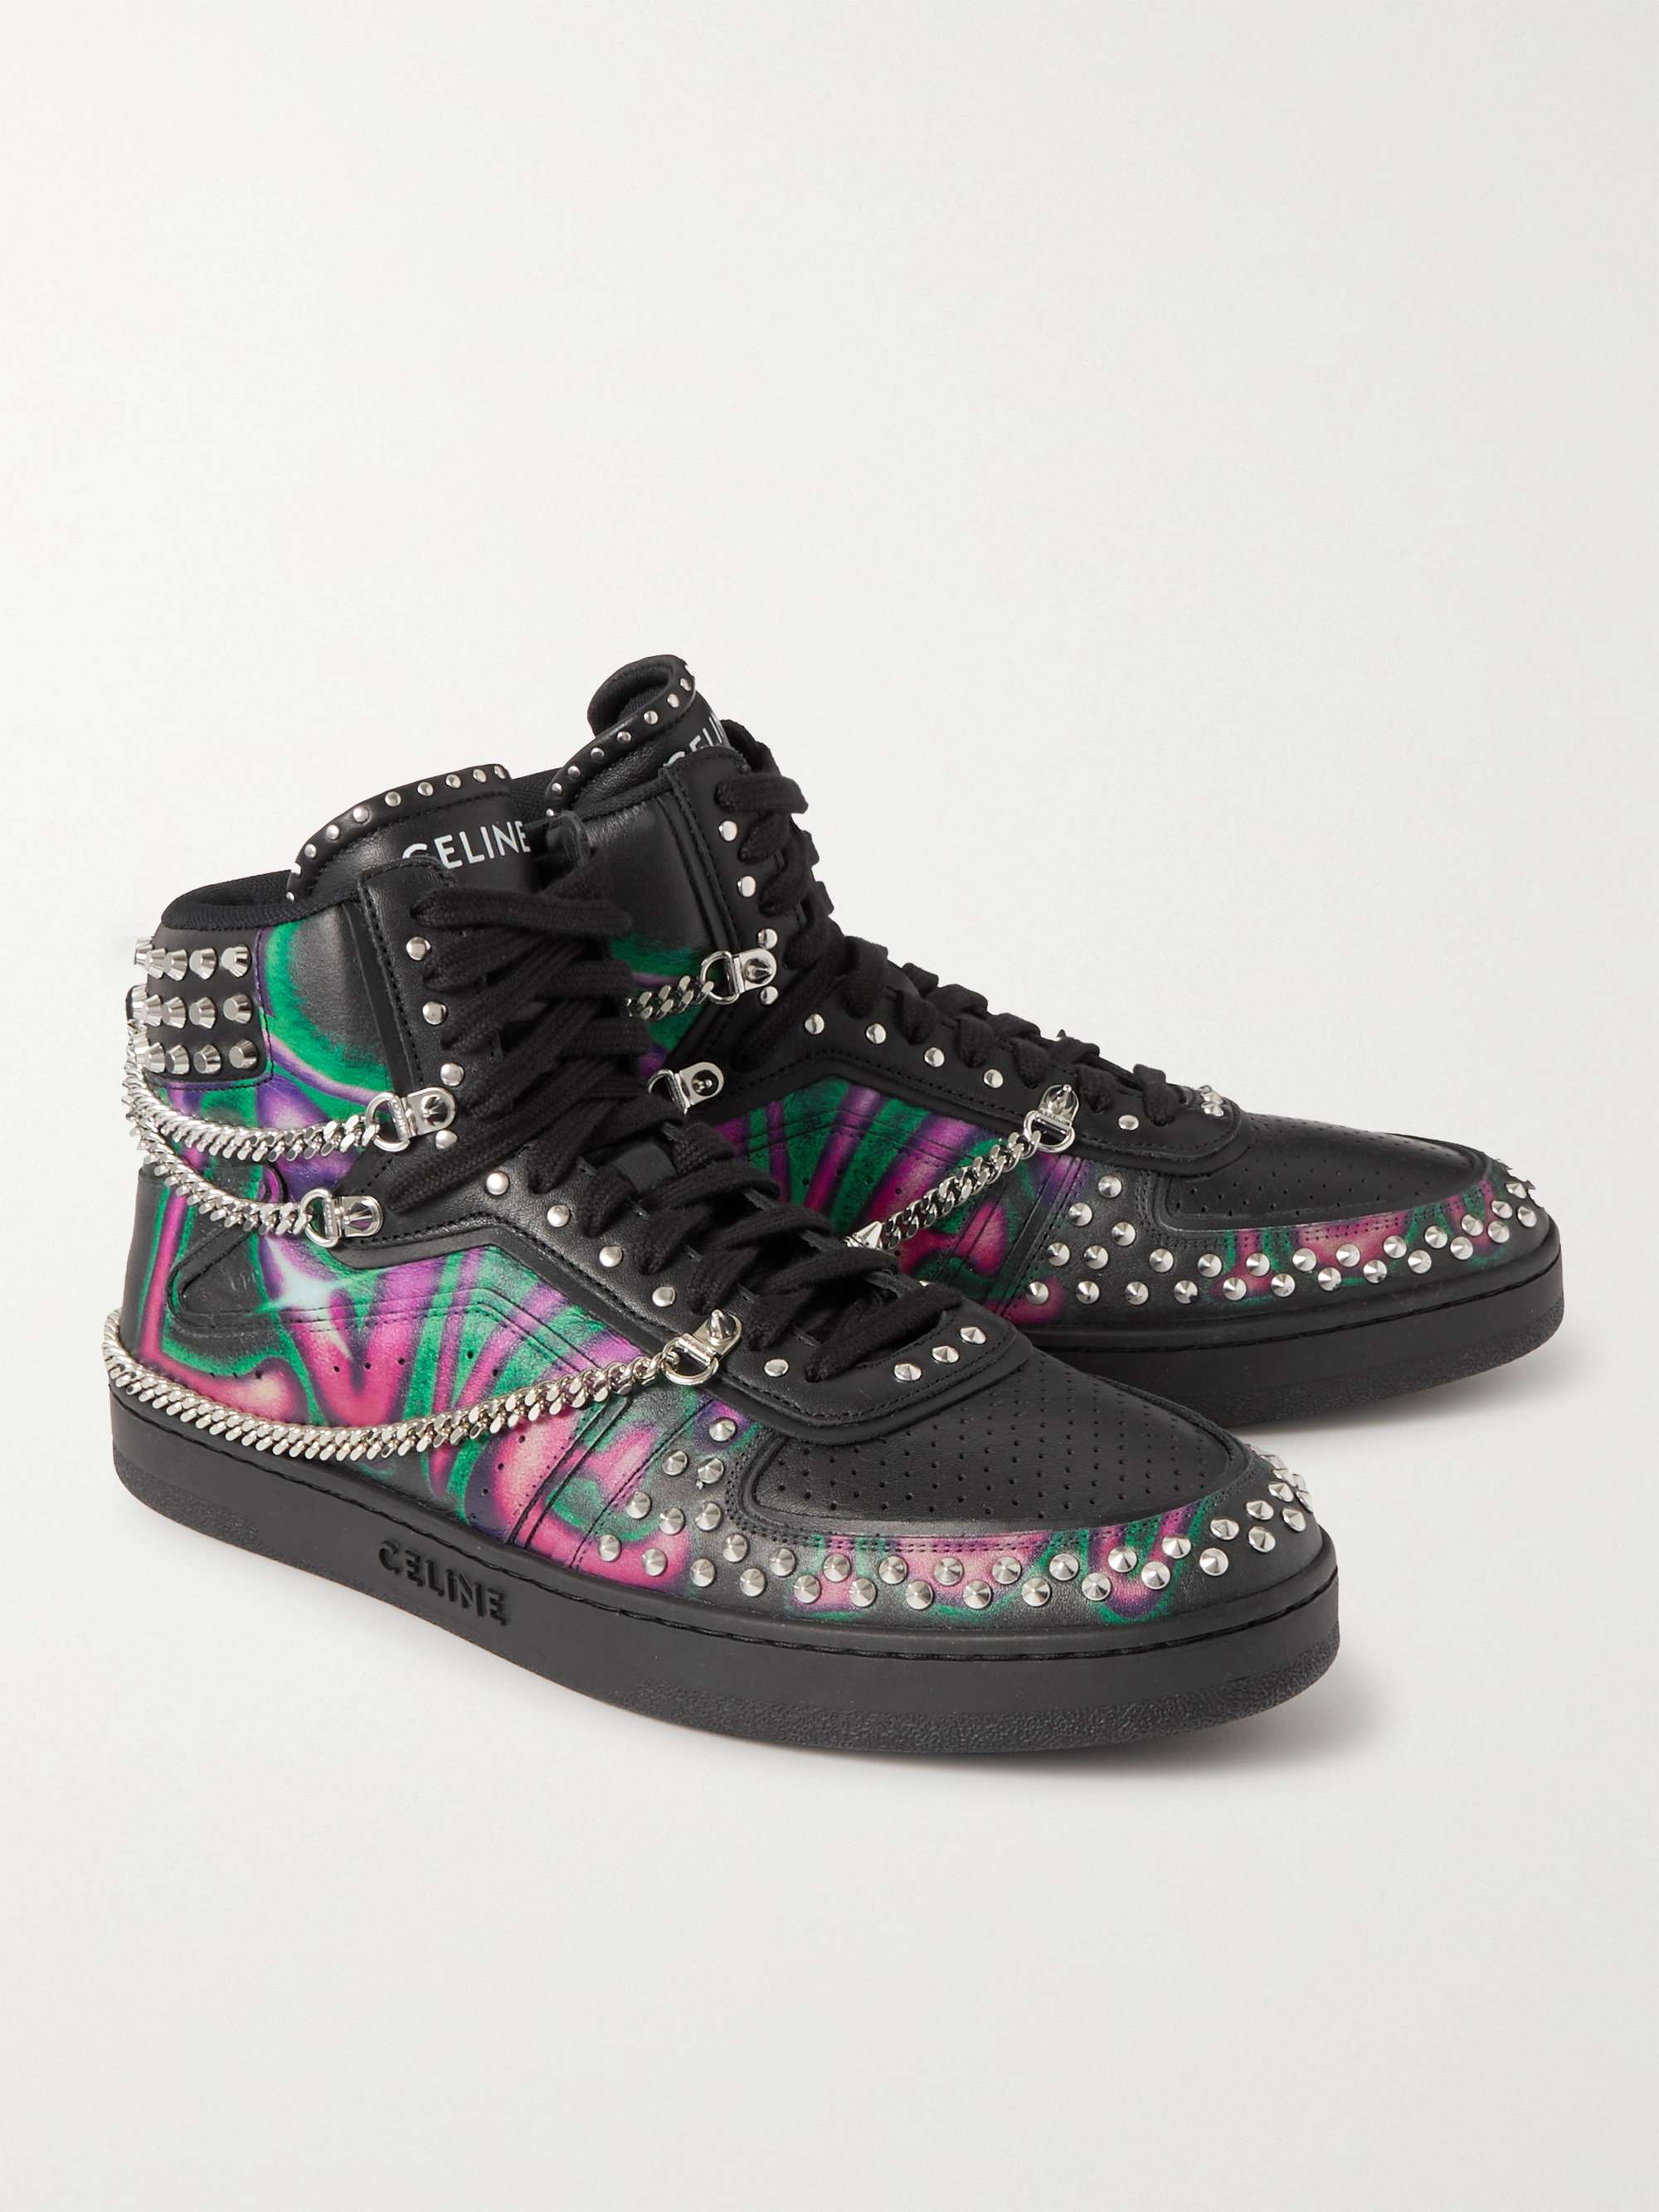 CELINE HOMME Z Stud Chain-Embellished Printed Leather High-Top Sneakers